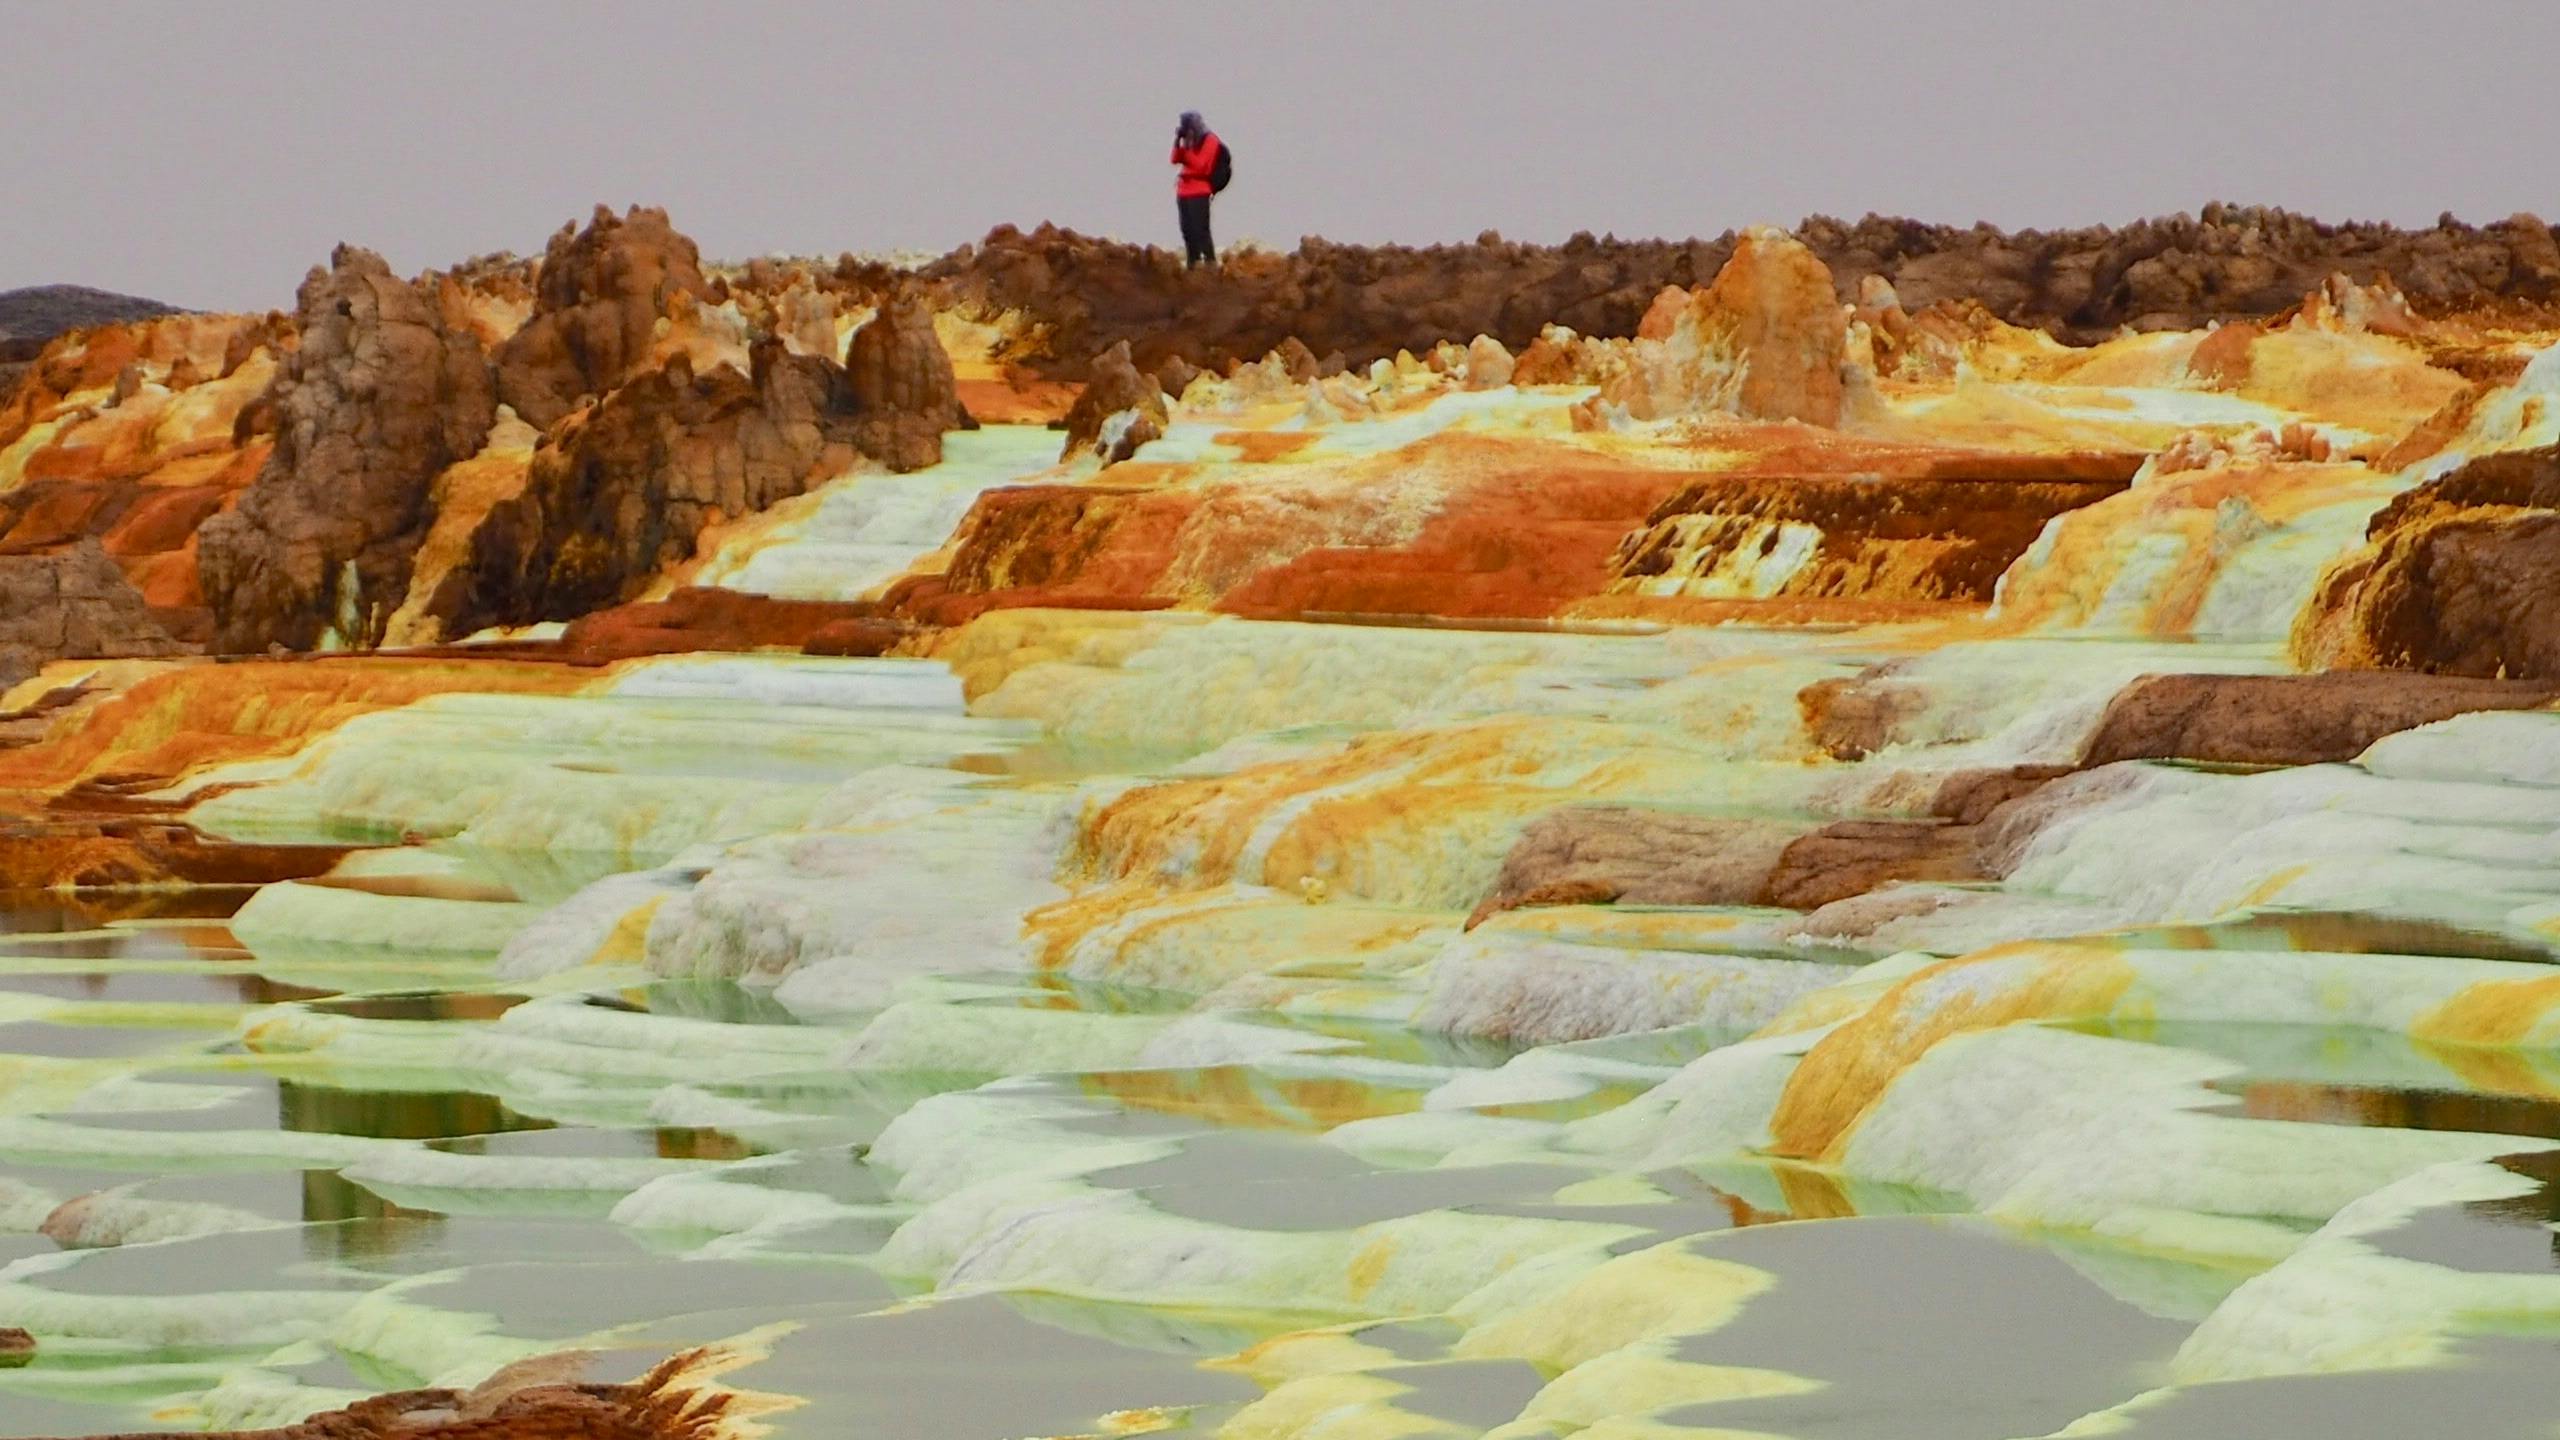 A photographer in the background of a vividly orange and green landscape